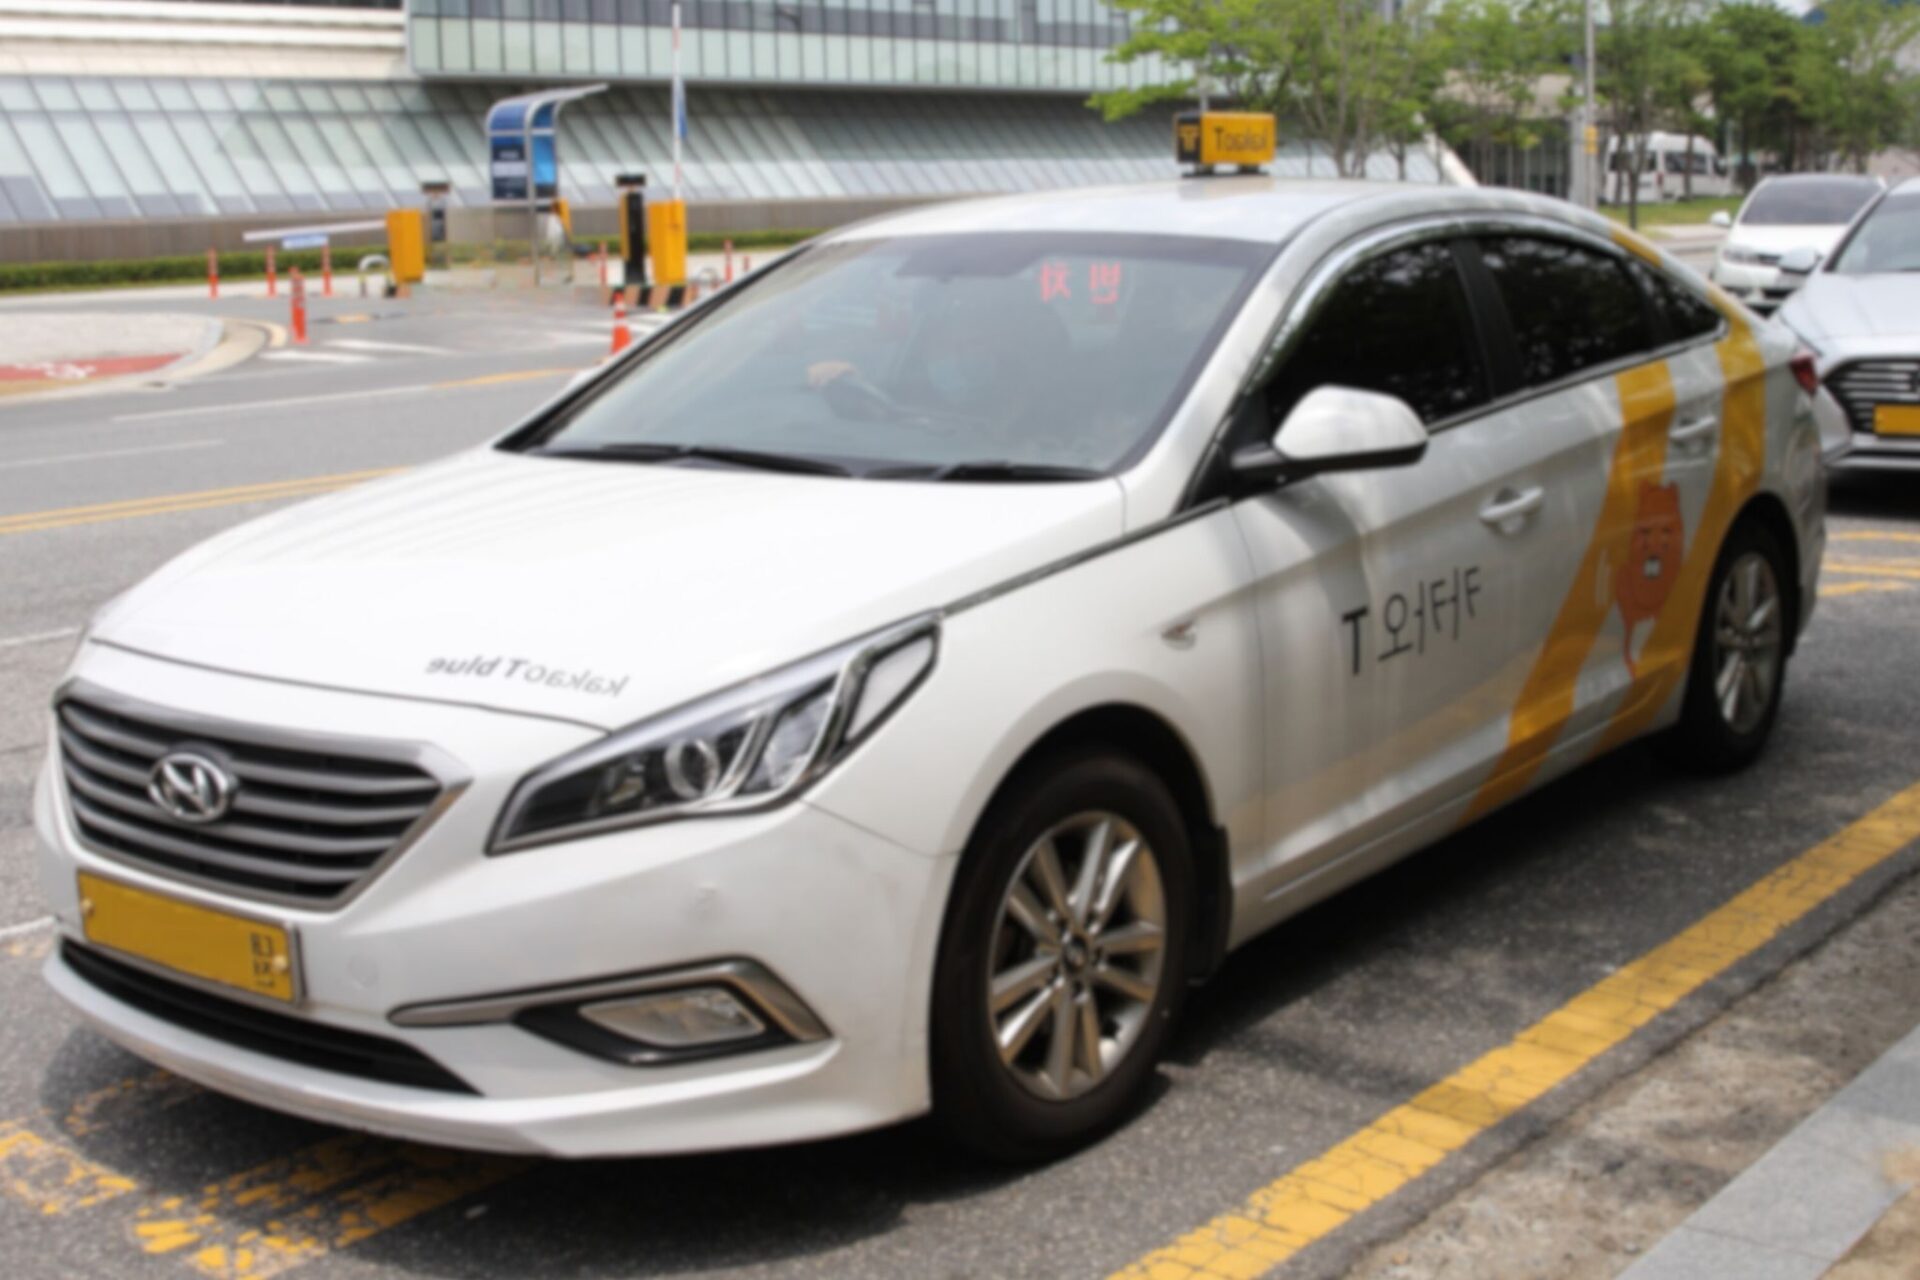 Cabs in South Korea: Everything you need to know!